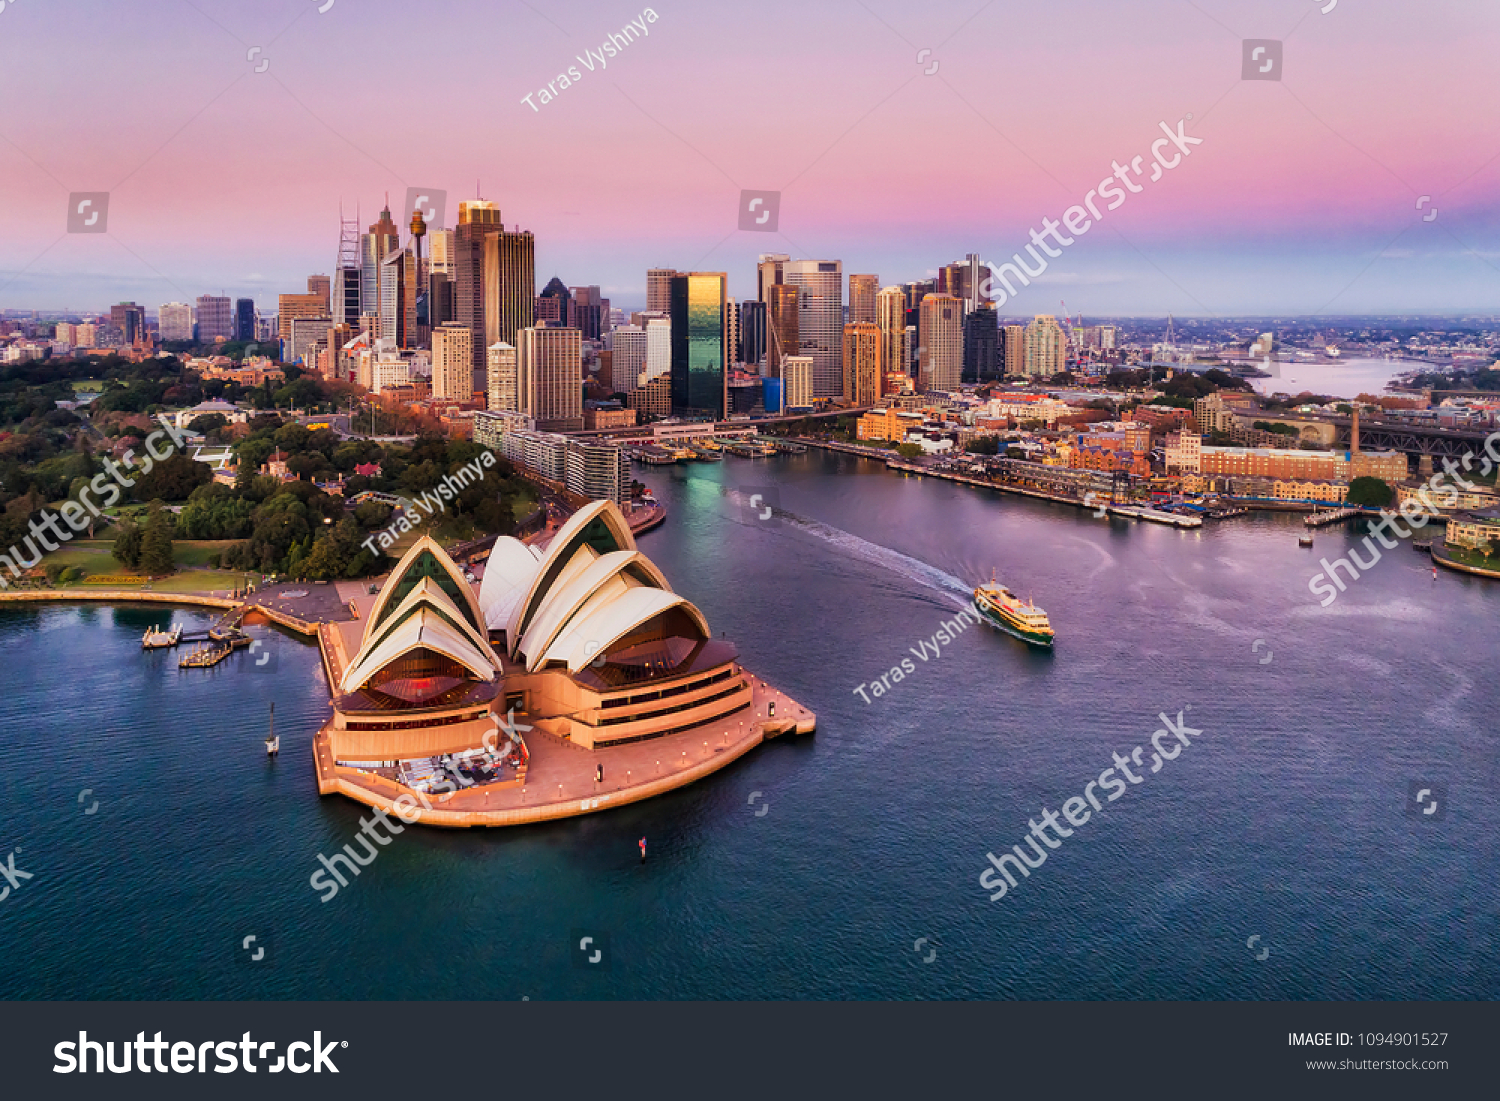 Pinkish colourful sunrise over Sydney city CBD on waterfront of Harbour around Circular quay with major architectural landmarks and symbols of Australia. #1094901527